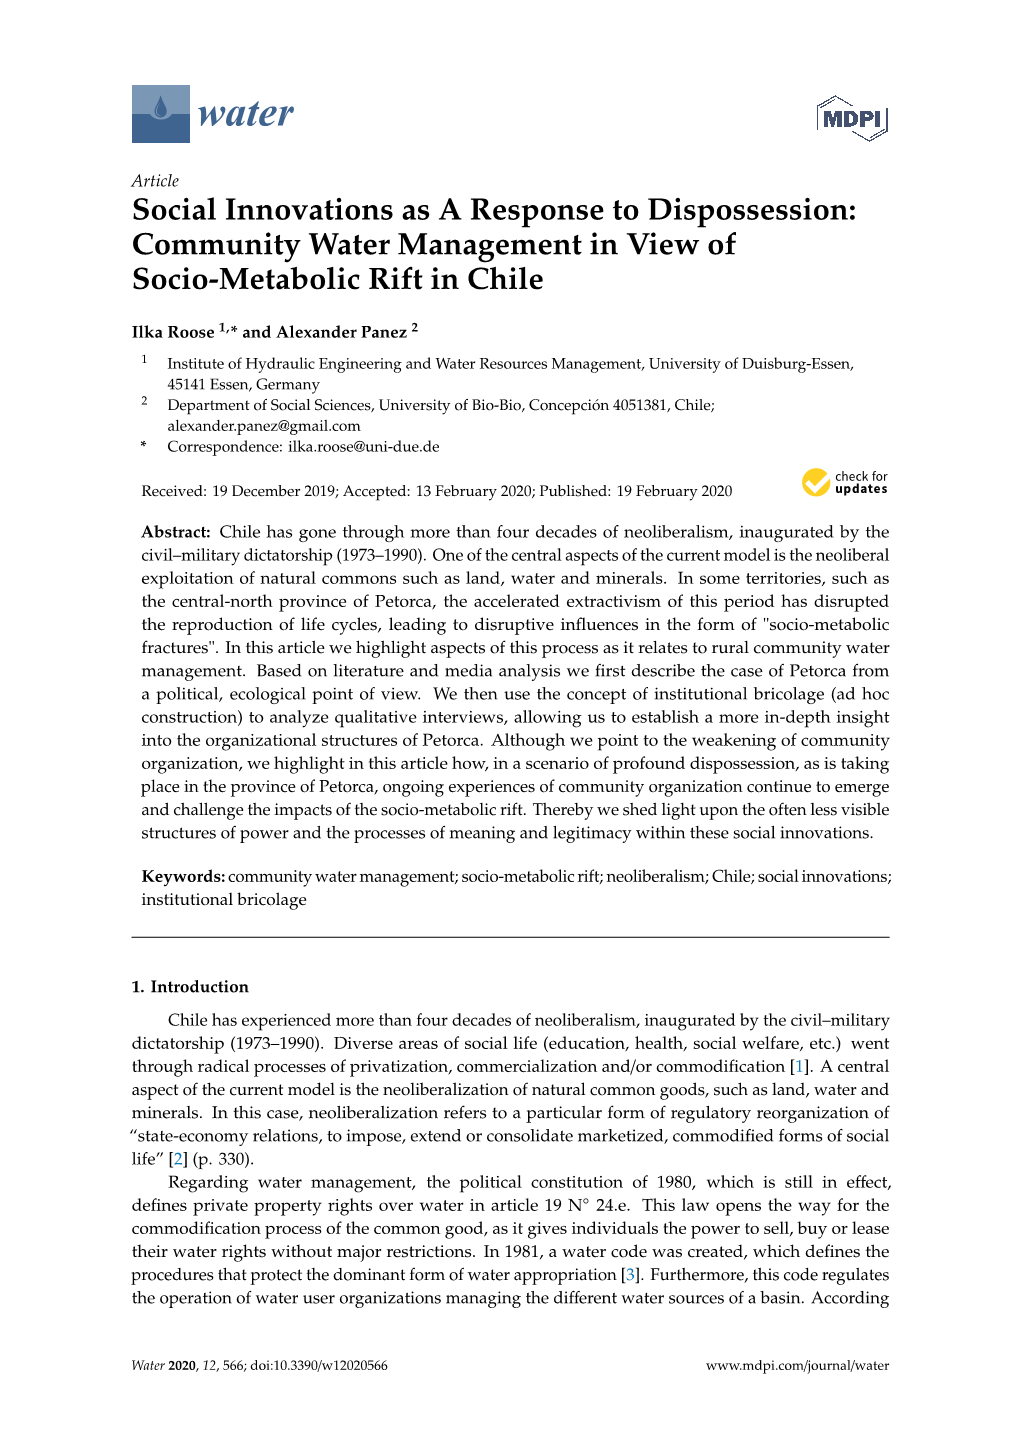 Community Water Management in View of Socio-Metabolic Rift in Chile